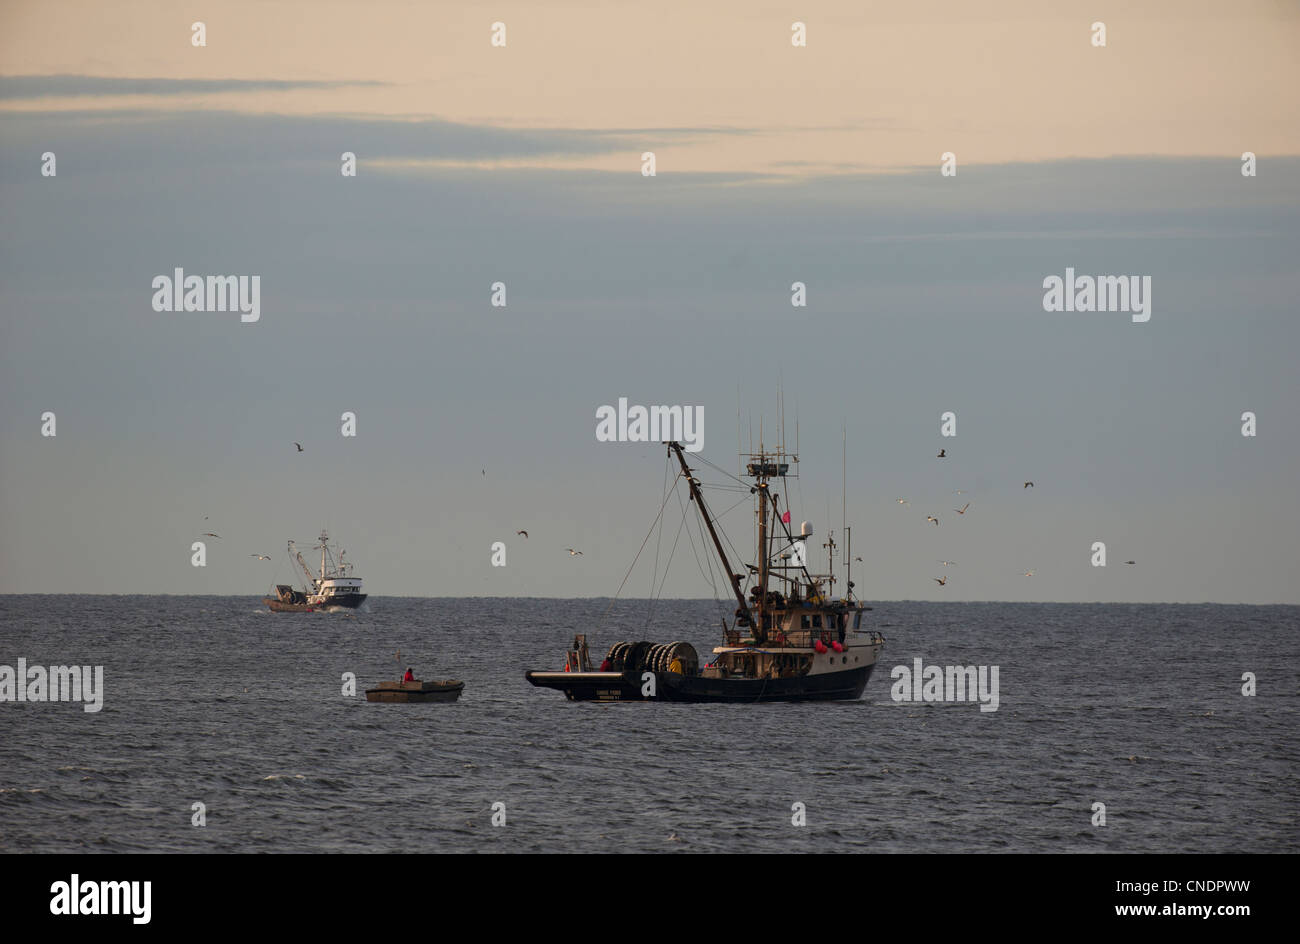 Premium Vector  Set of commercial fishing ships with full fish net under  water fishing boat with yellow mast working in ocean catching by seine tuna  herring sardine salmon industry vessels vector